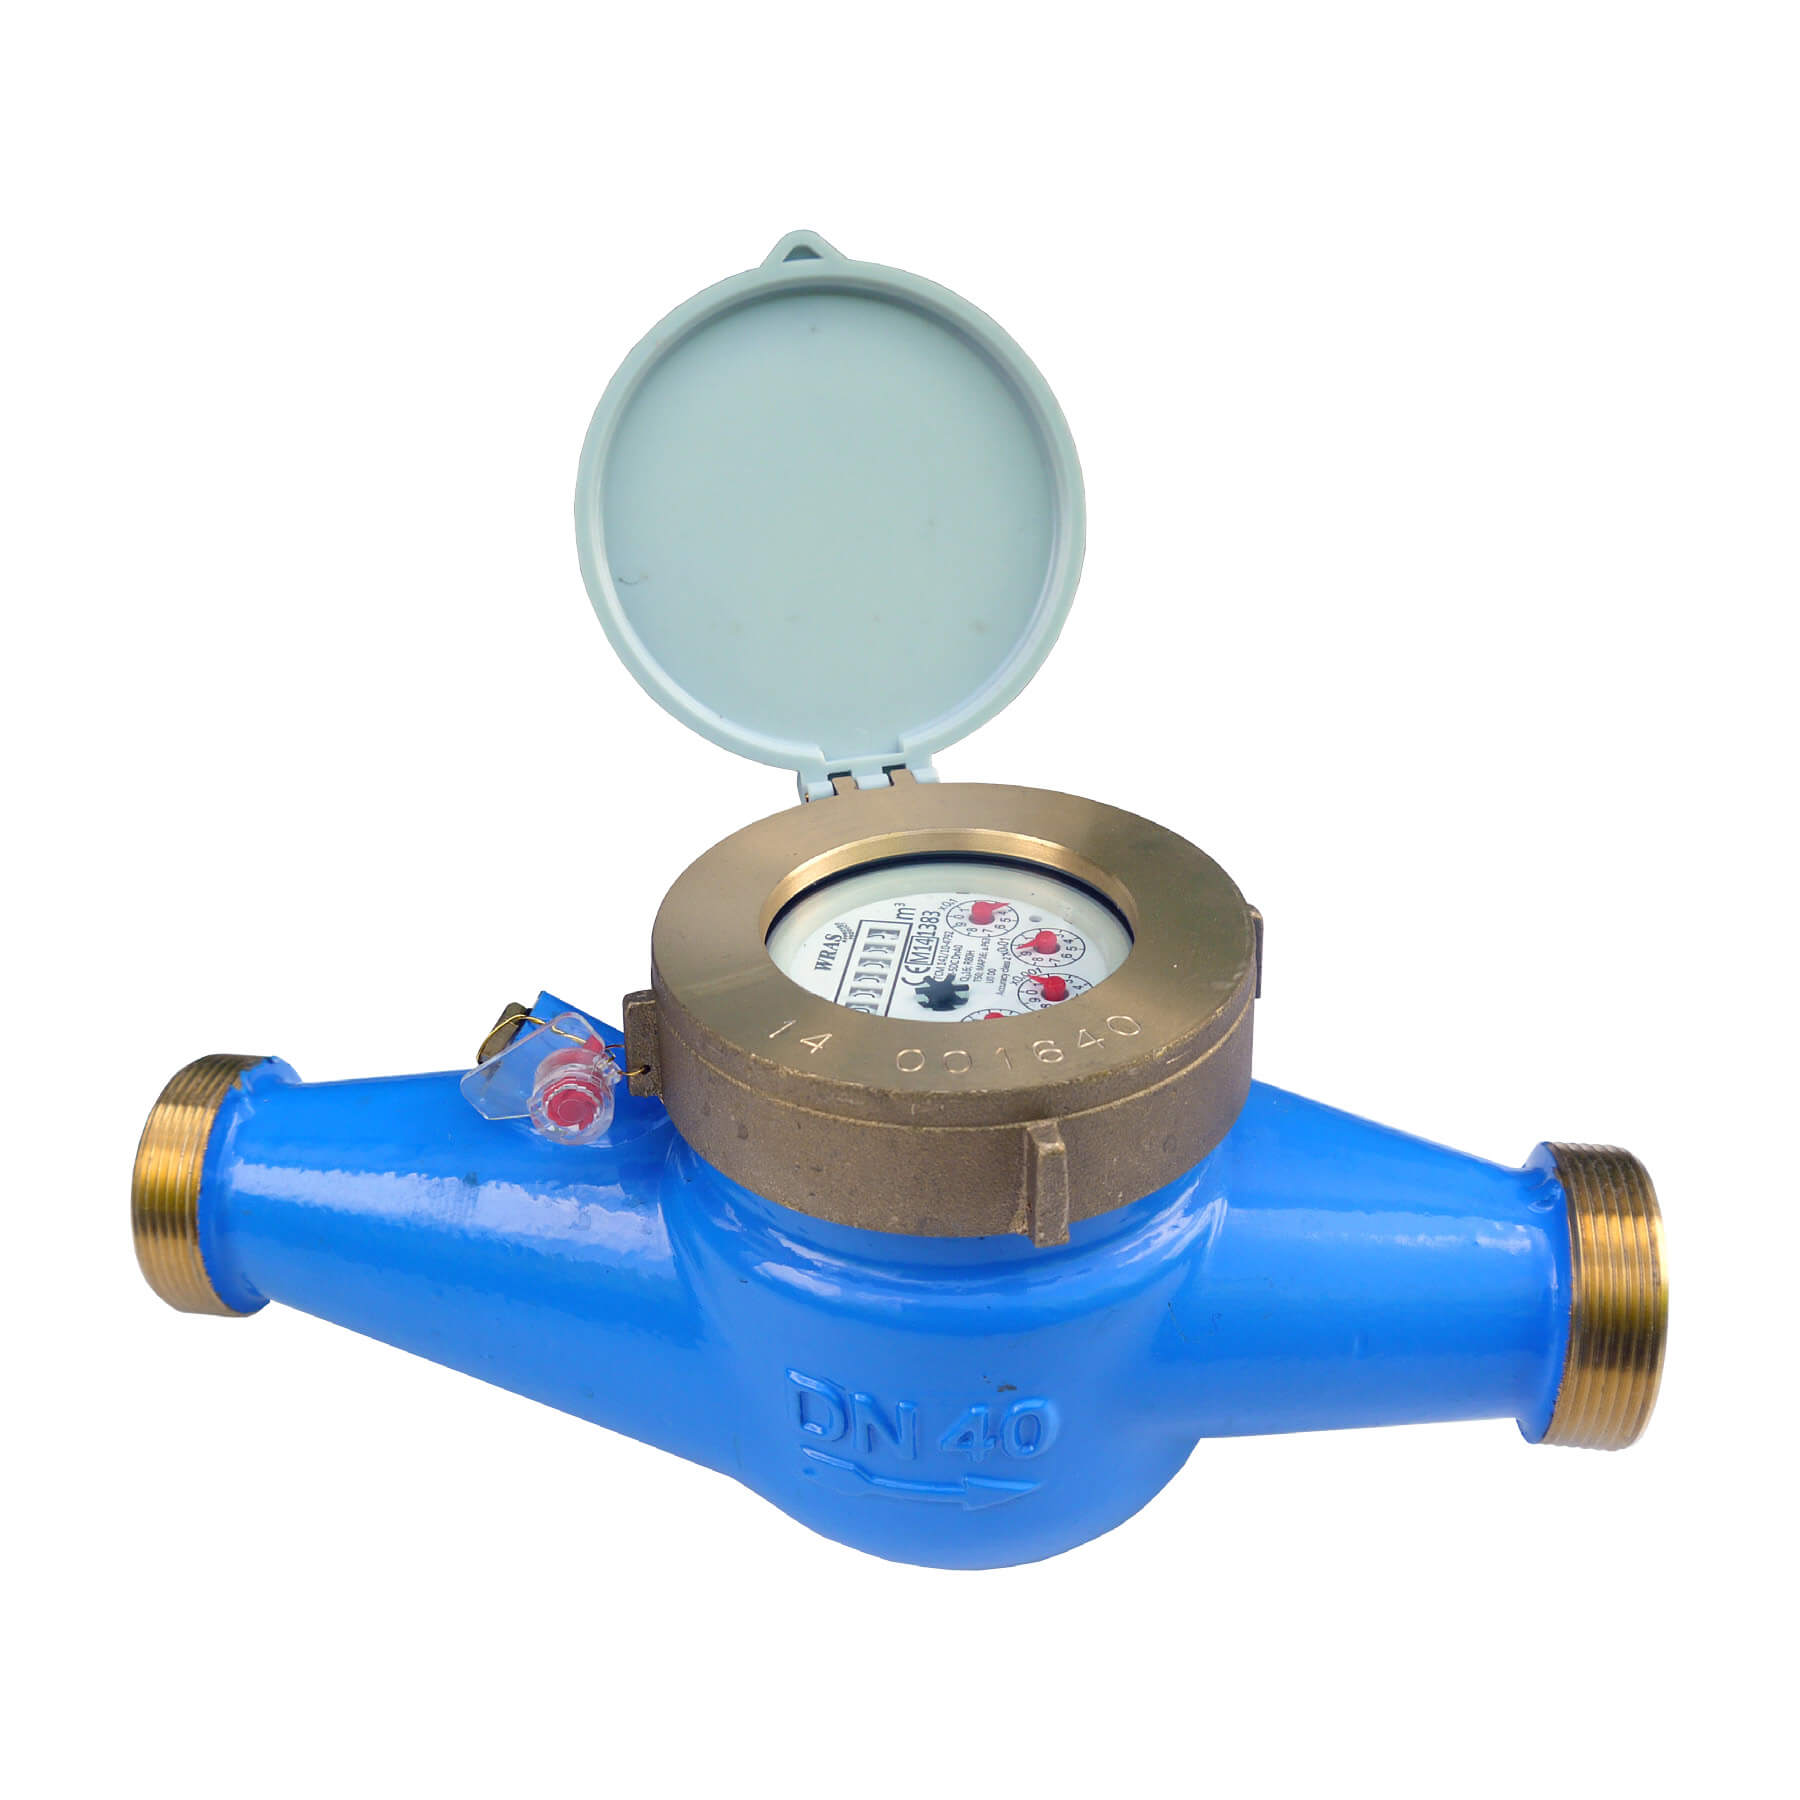 MJ- SDC MULTI-JET WATER METER WITH DRY DIAL